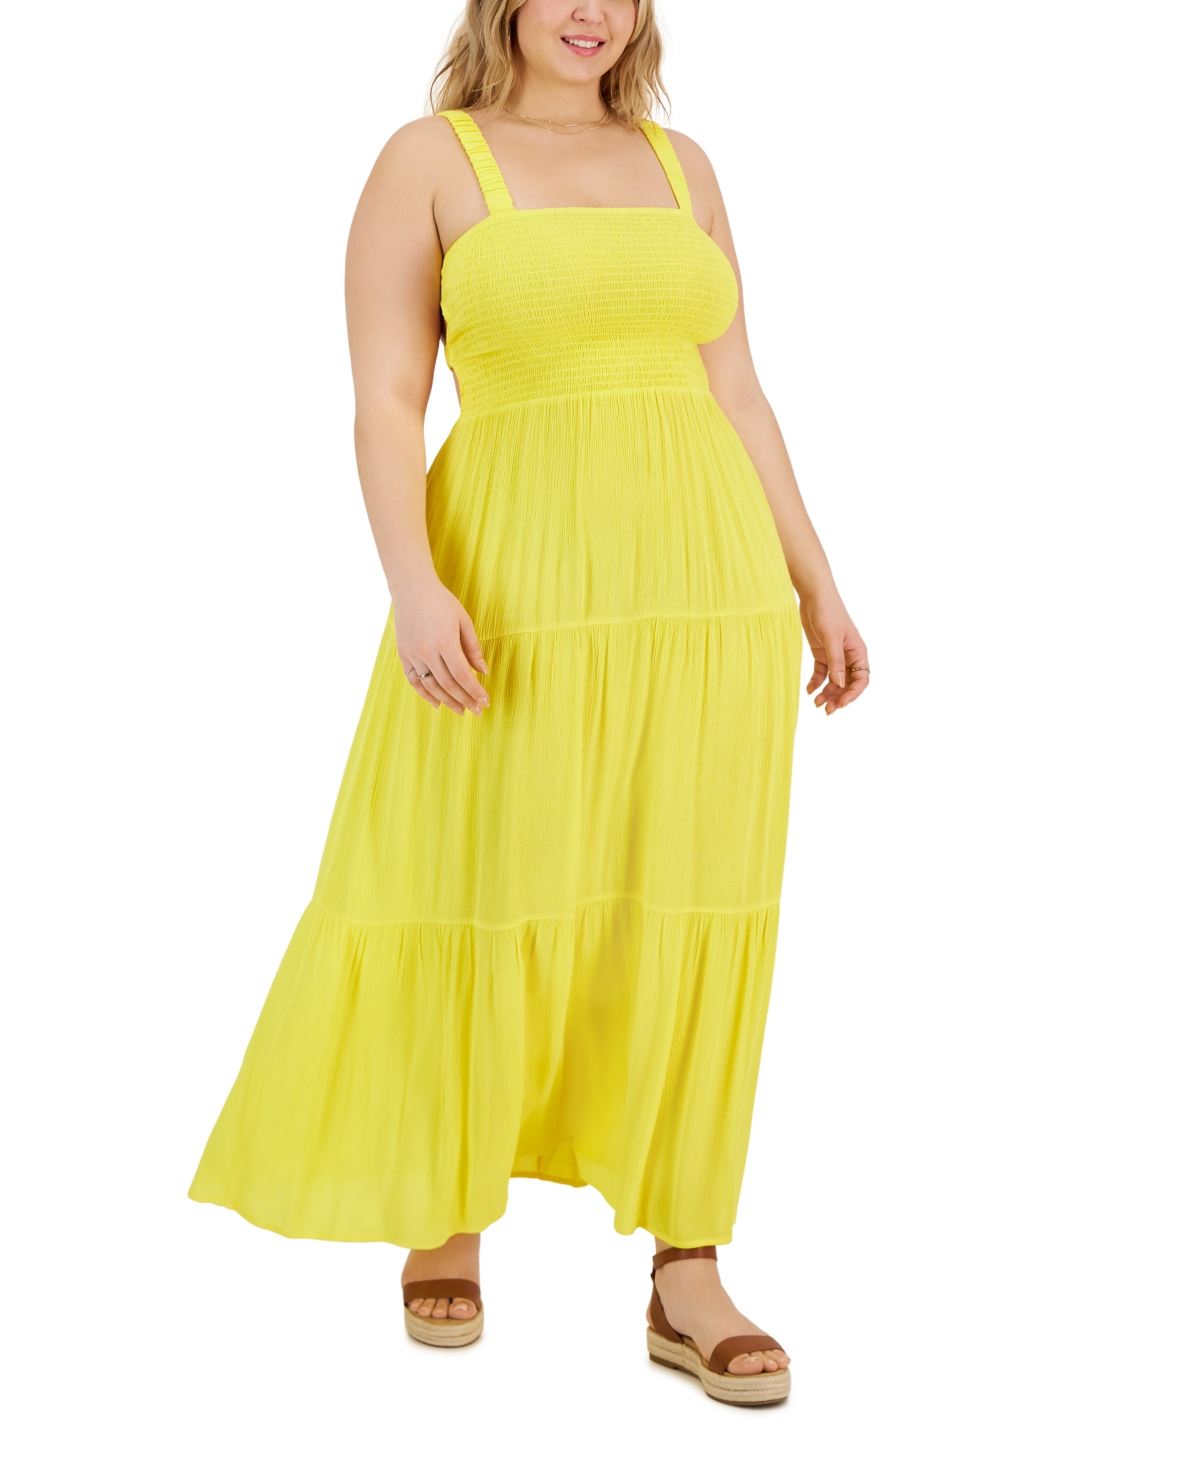 Full Circle Trends Trendy Plus Size Tiered Maxi Dress